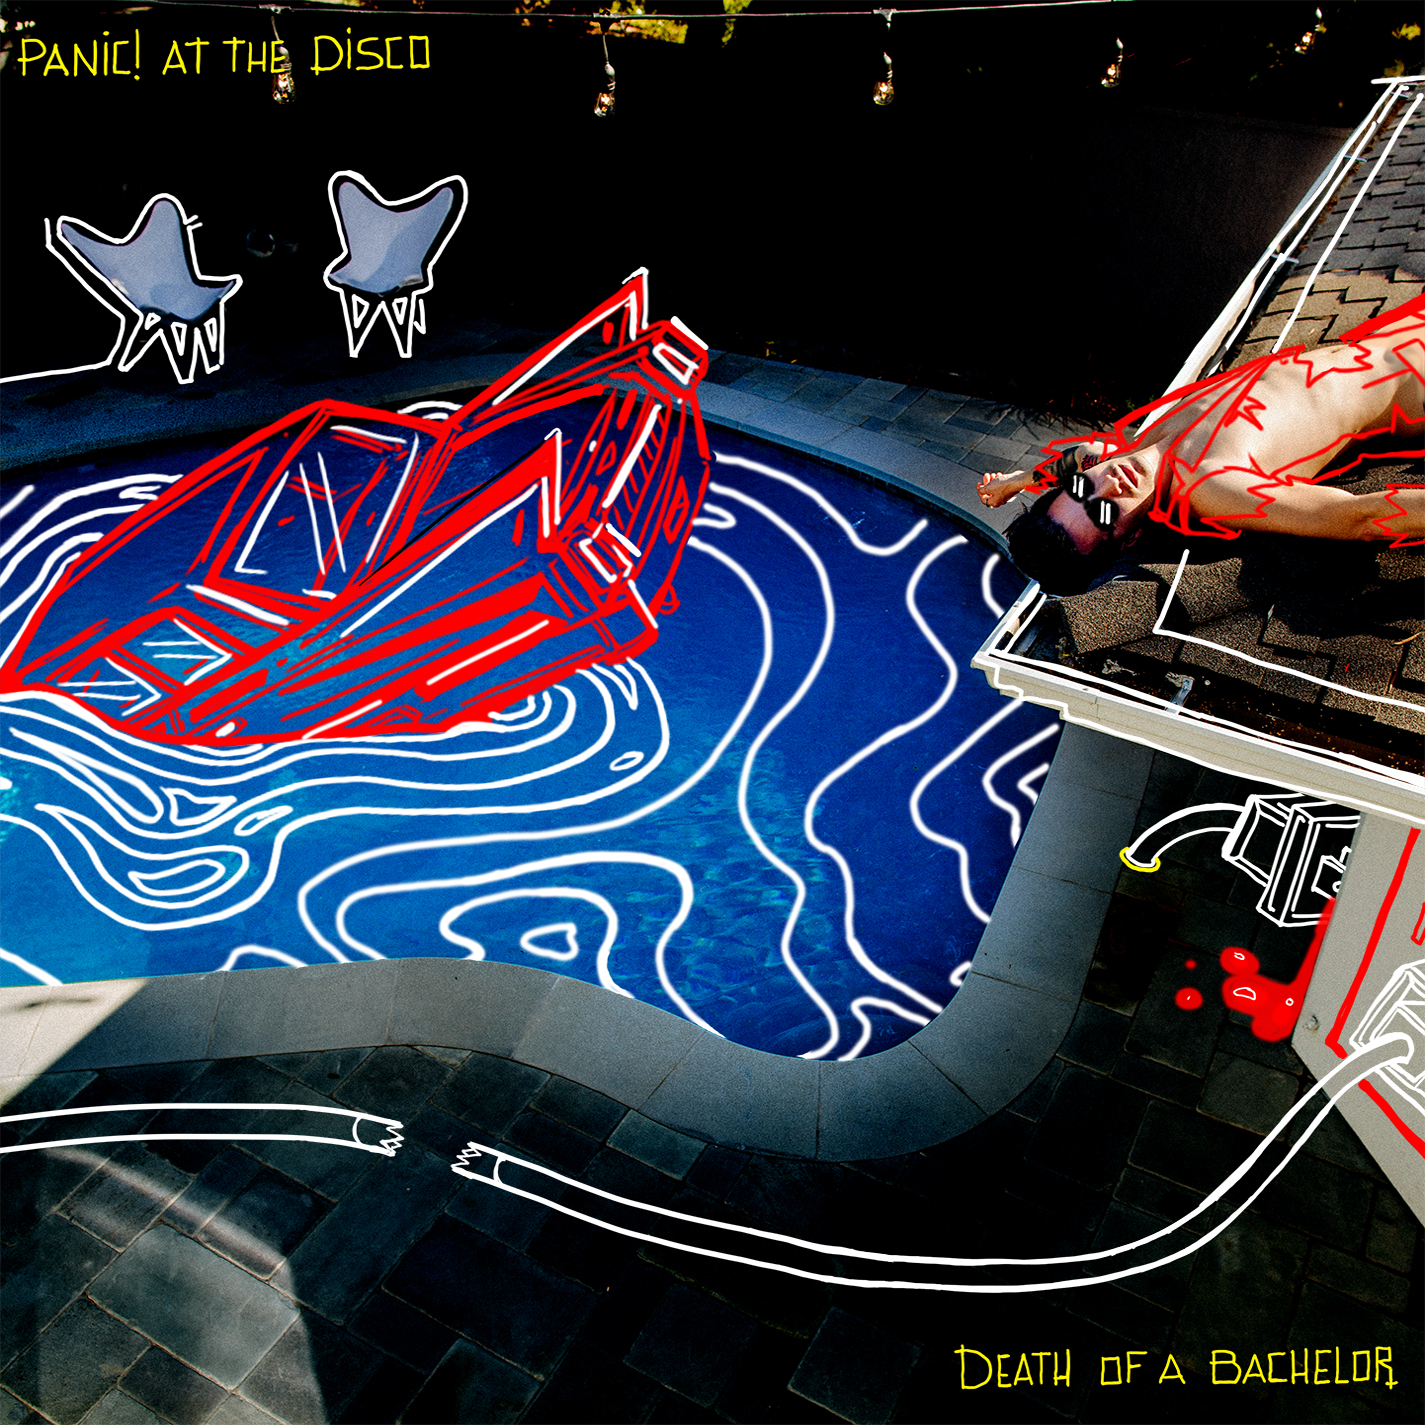 Panic! at the disco: “Death of a bachelor” esce il 15 gennaio!